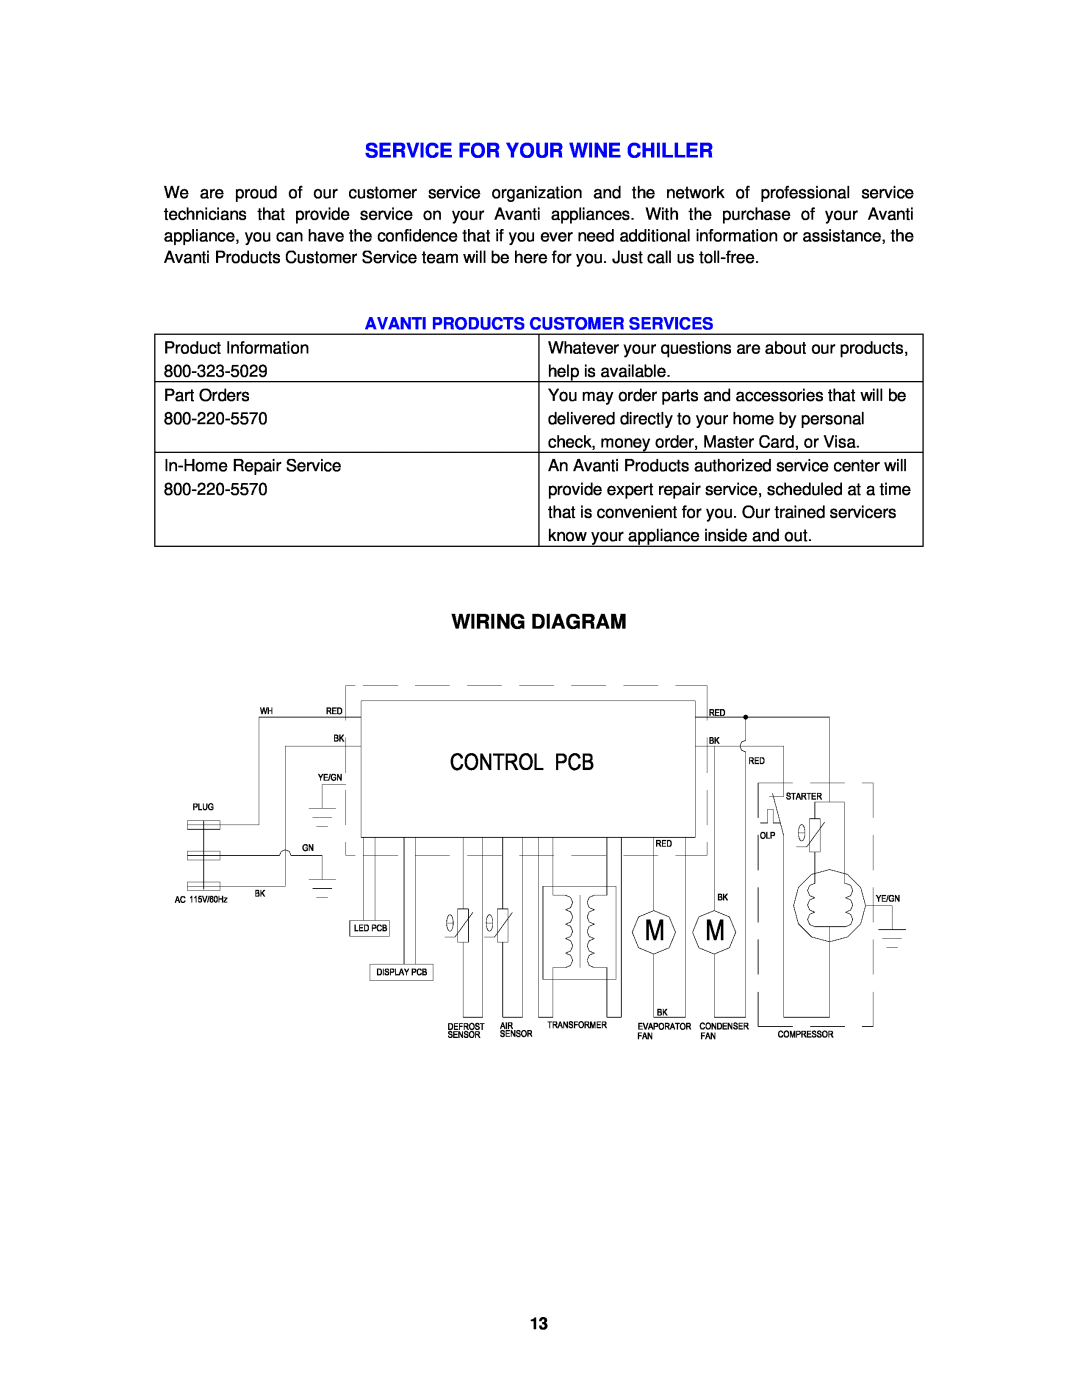 Avanti WC1500DSS instruction manual Service For Your Wine Chiller, Wiring Diagram, Avanti Products Customer Services 